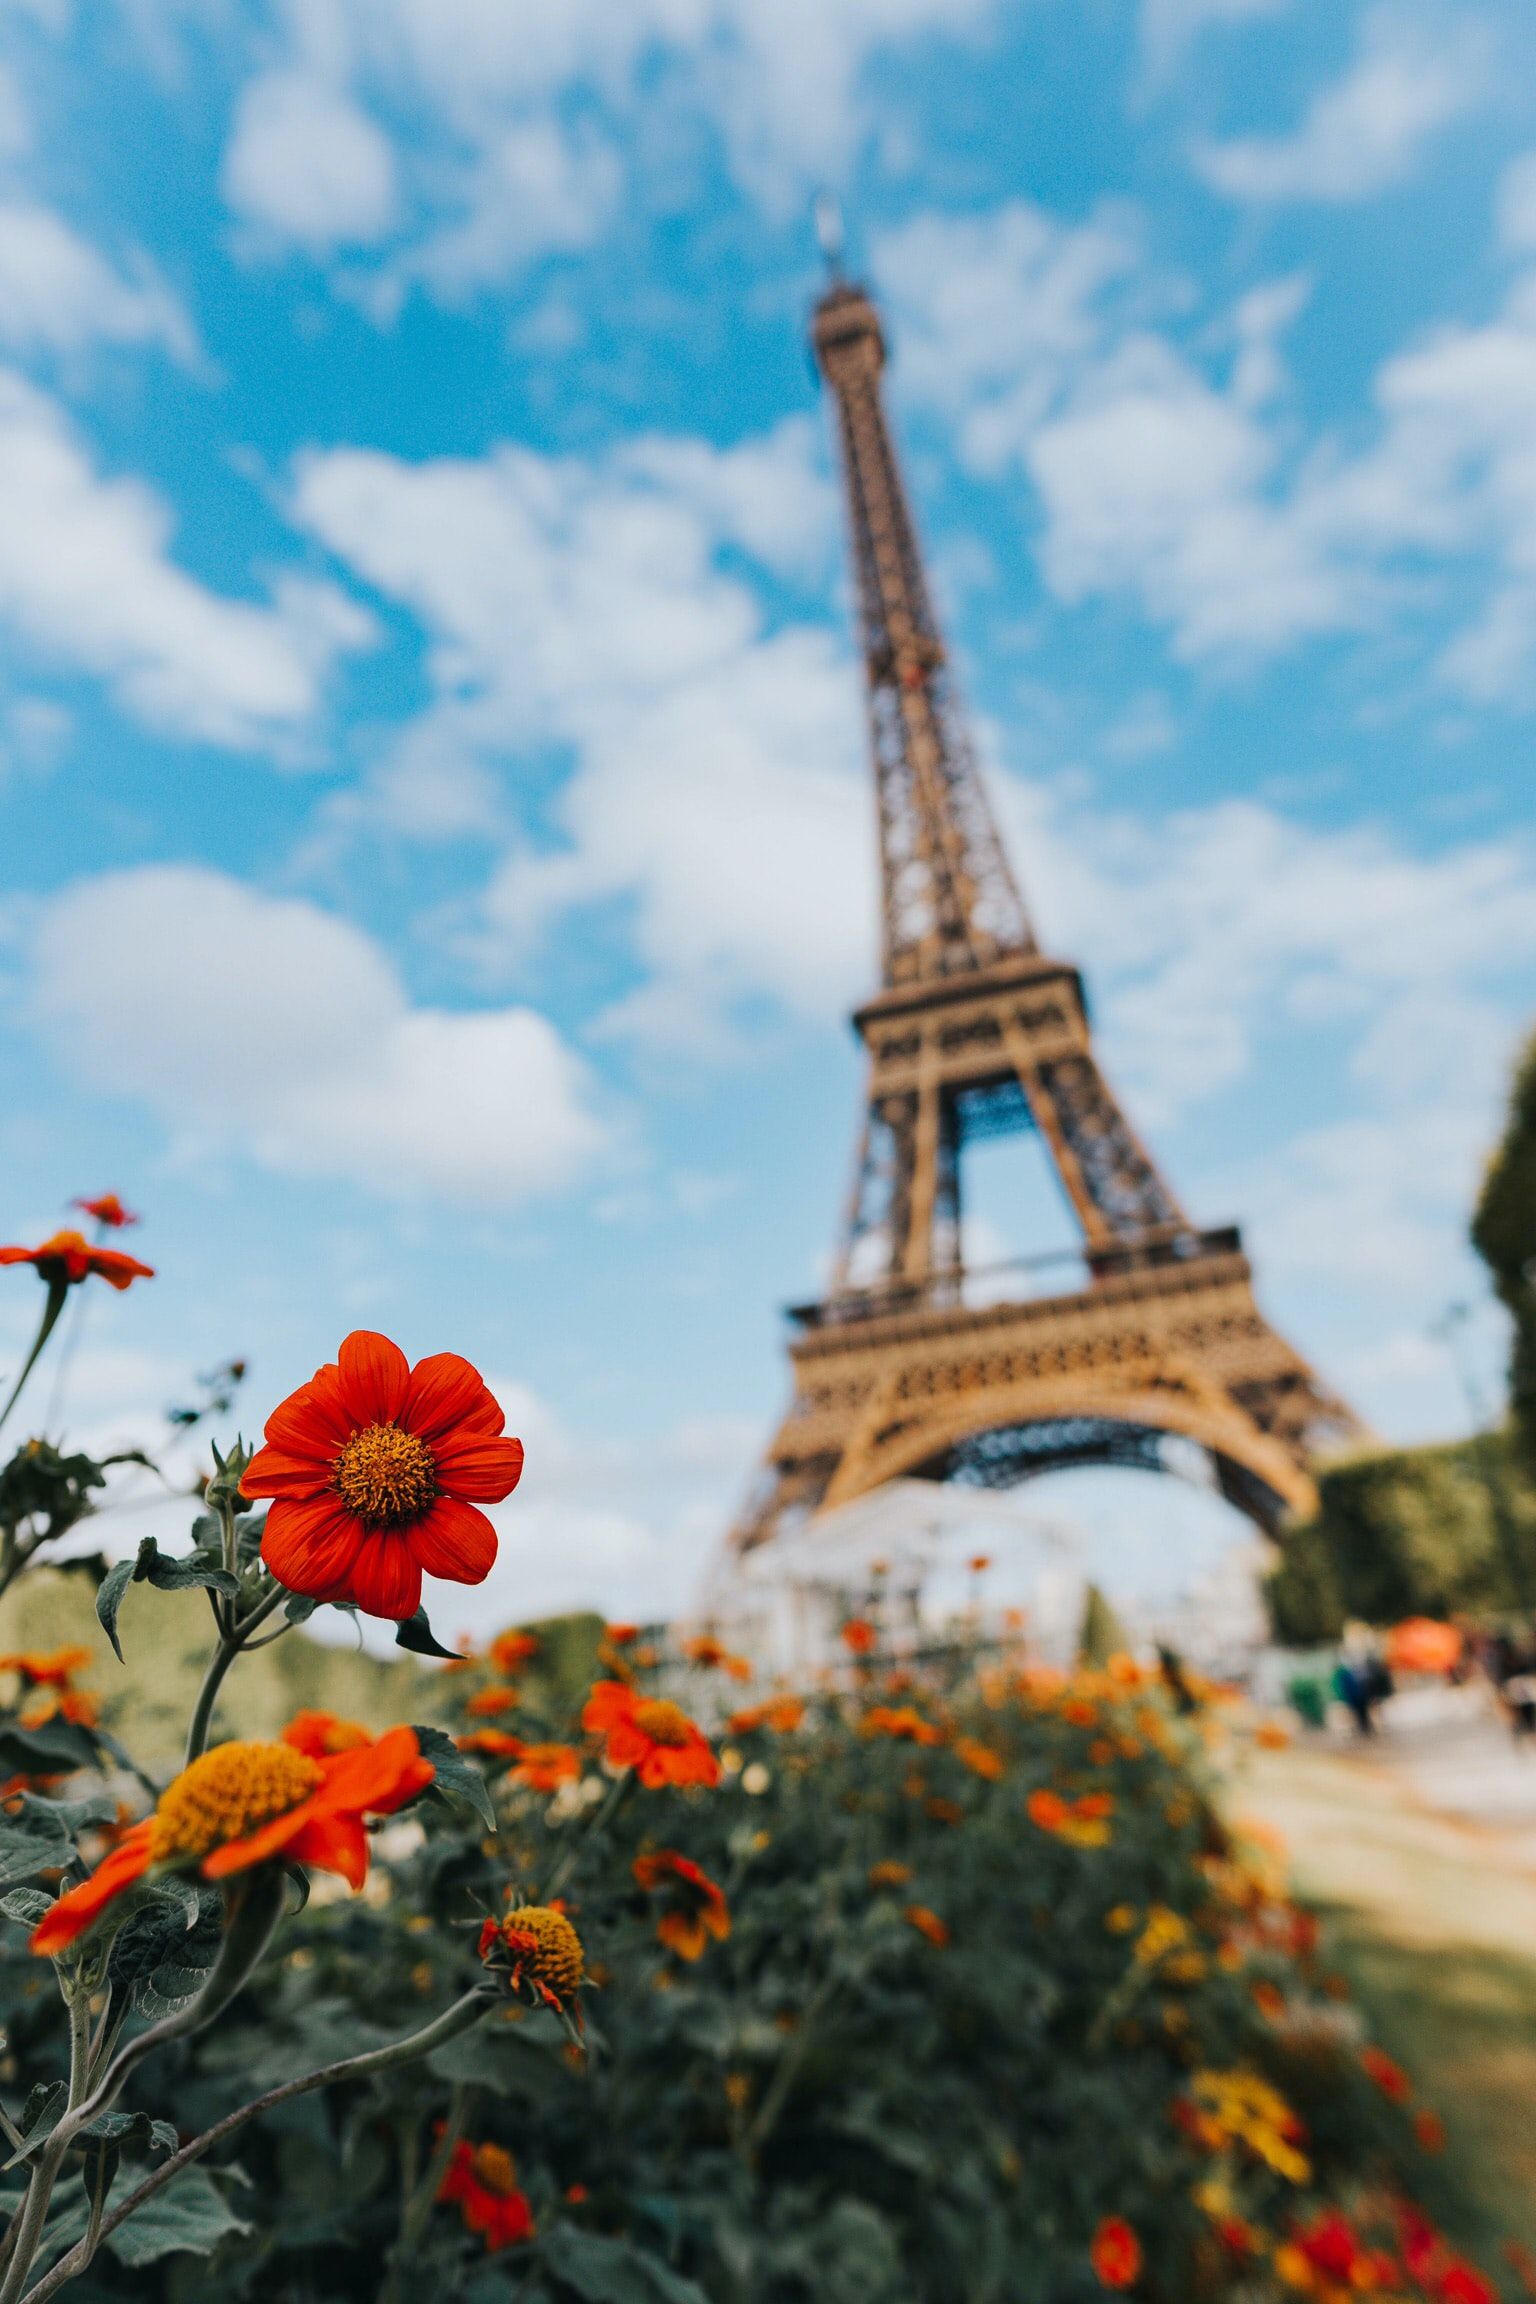 What To Do at the Eiffel Tower Gardens: Flowers, Photo, Fun